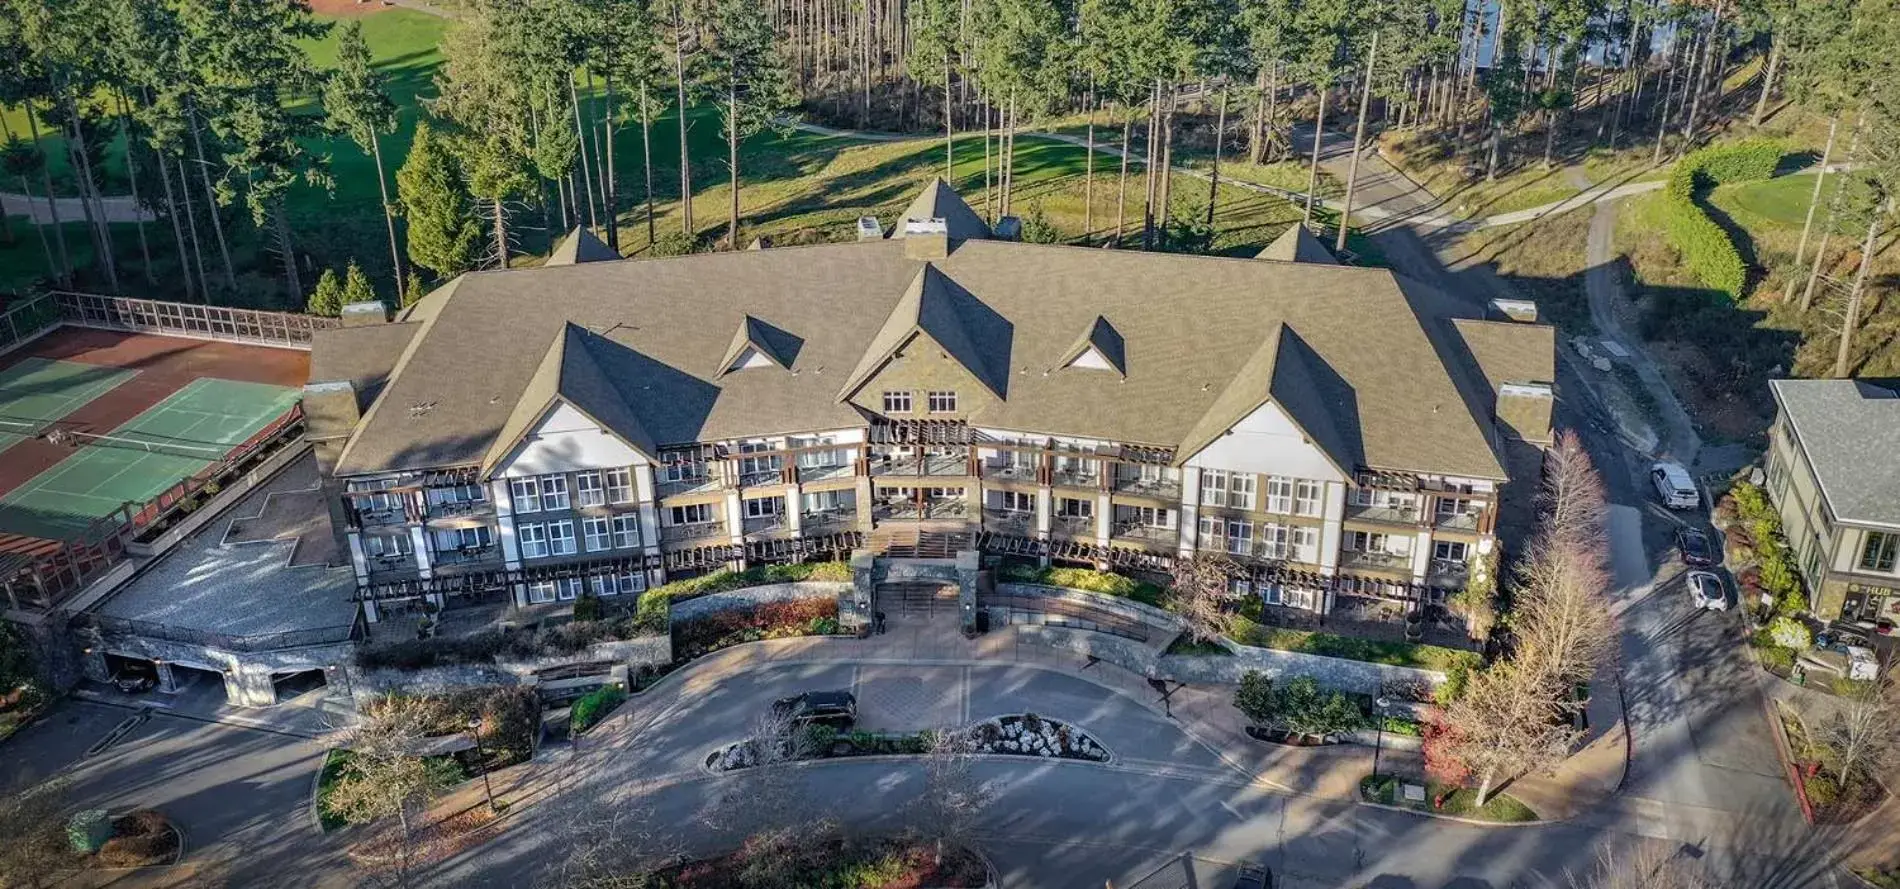 Property building, Bird's-eye View in Fairways Hotel on the Mountain